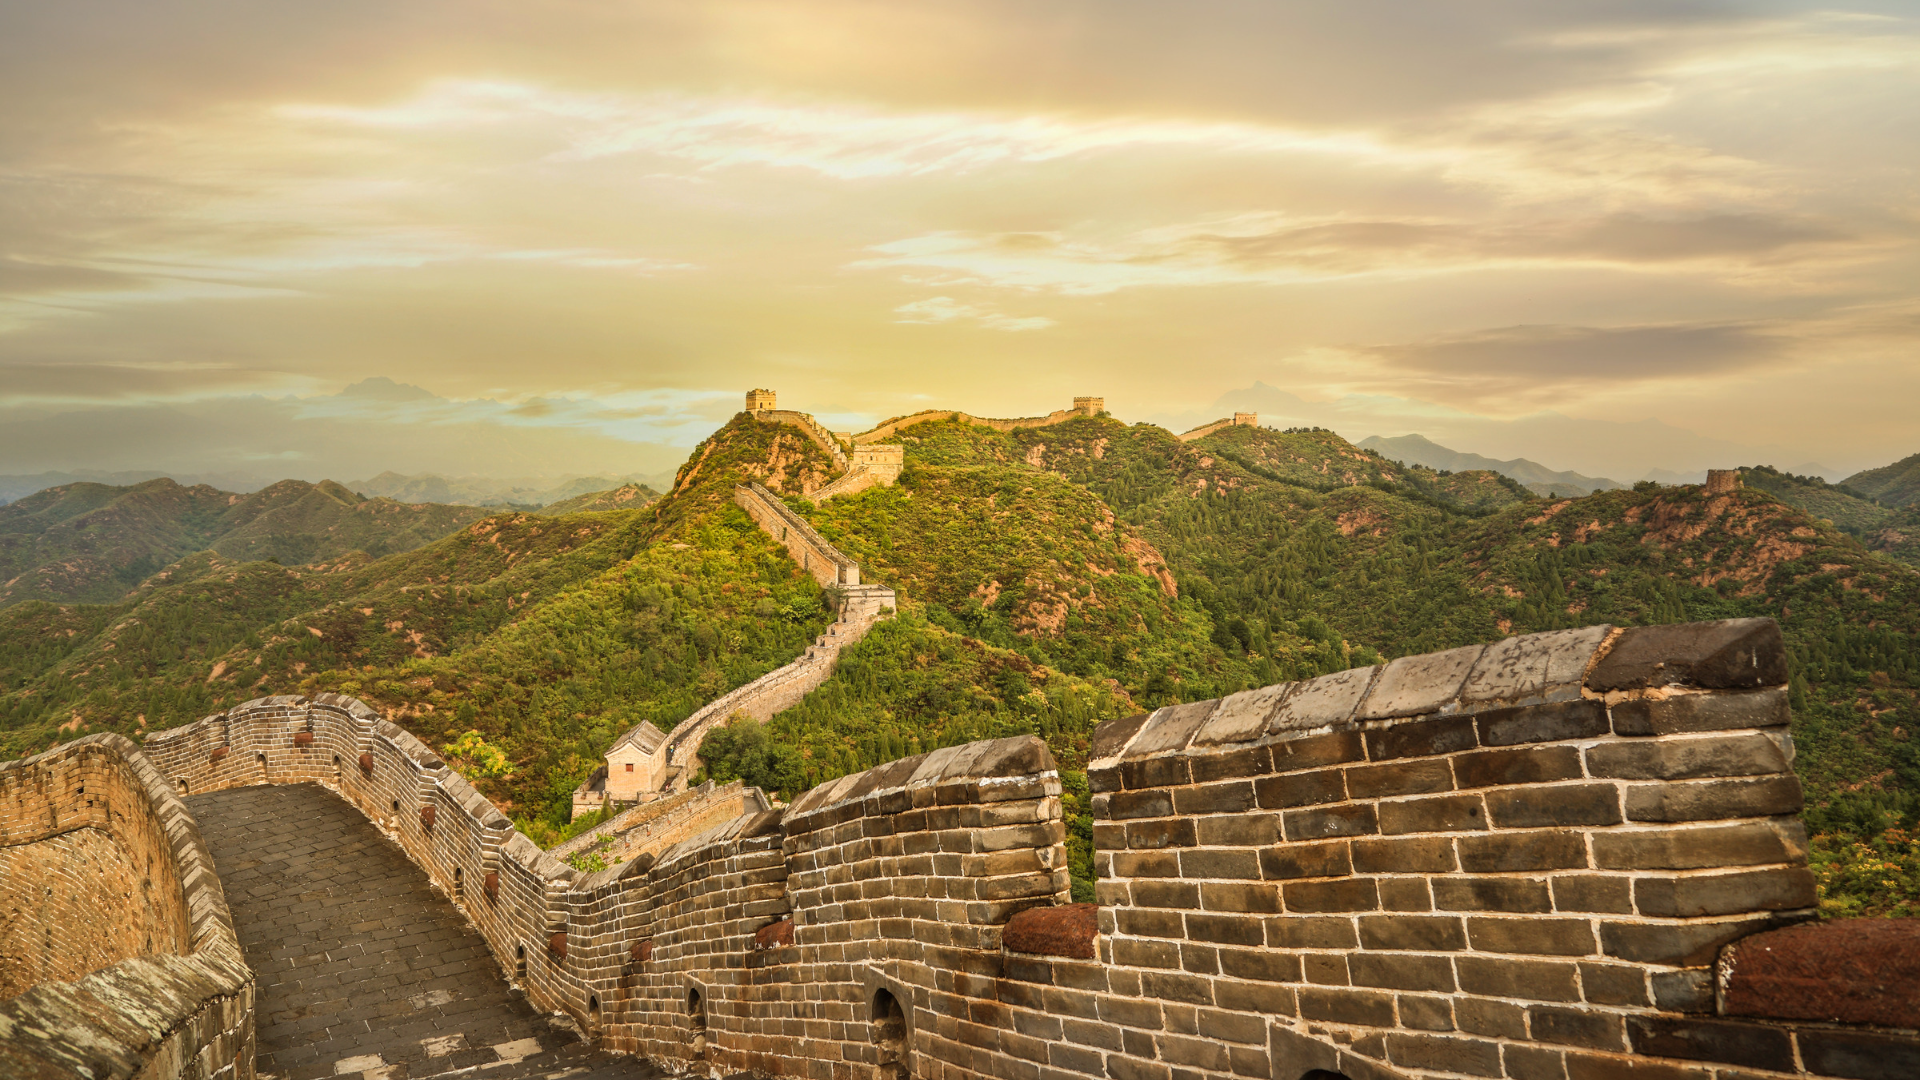 No travel bucket list is complete without a visit to the Great Wall of China. Stretching over 13,000 miles, this architectural marvel offers a glimpse into China's fascinating history. Explore the well-preserved sections near Beijing, such as Mutianyu or Jinshanling, and take in panoramic views of the surrounding countryside. The Great Wall is a testament to human ingenuity and determination, leaving visitors in awe of this incredible feat.